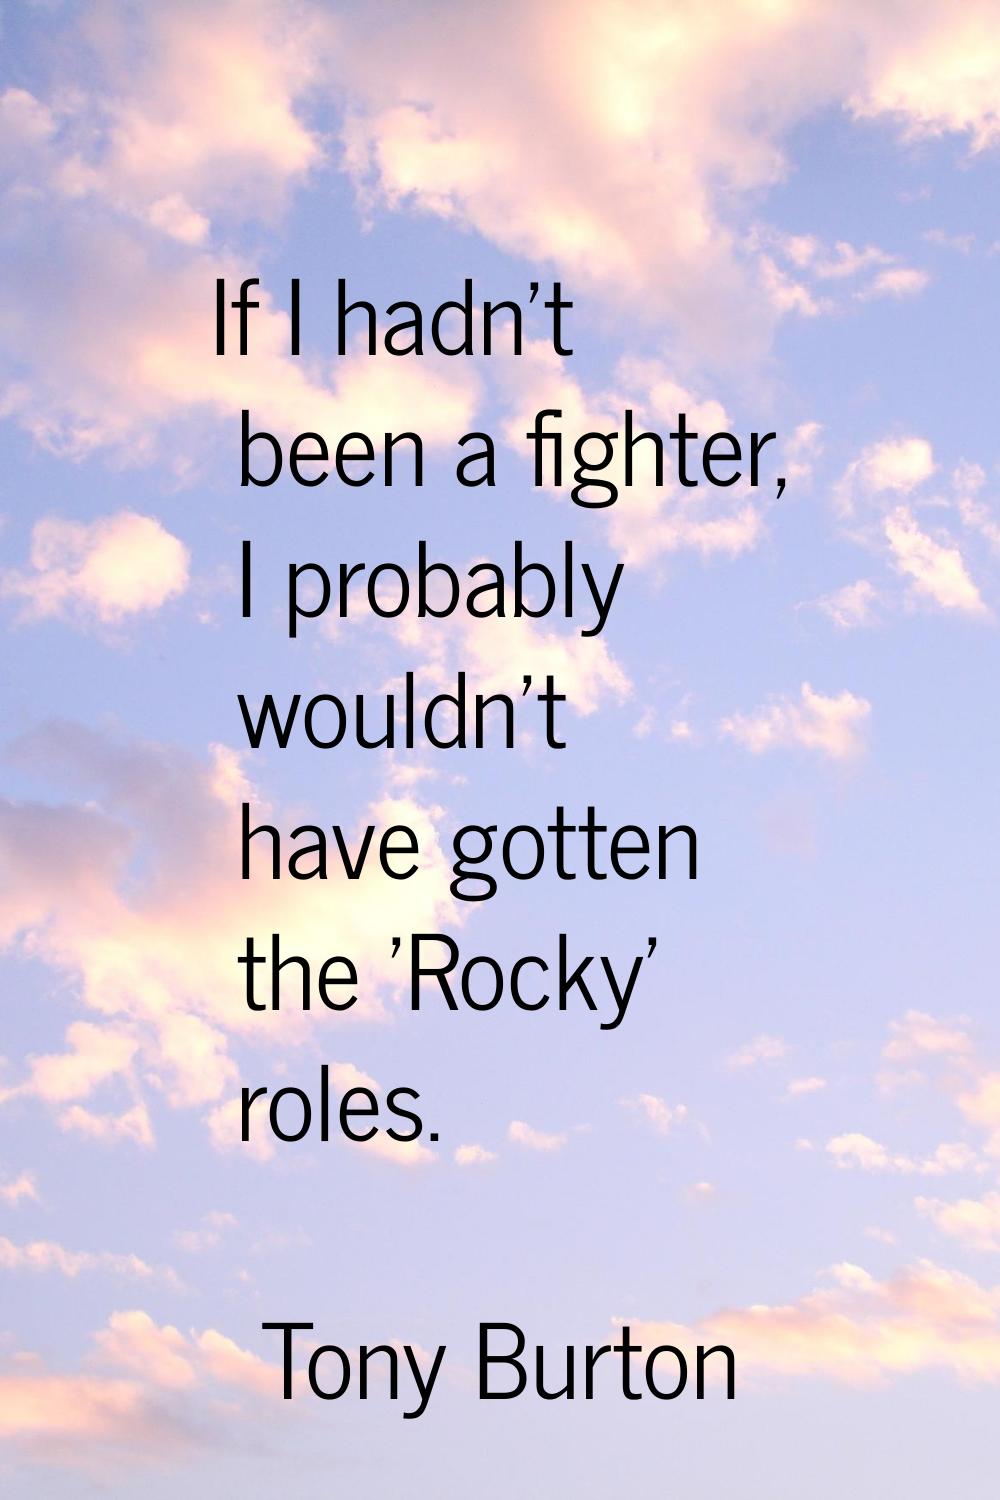 If I hadn't been a fighter, I probably wouldn't have gotten the 'Rocky' roles.